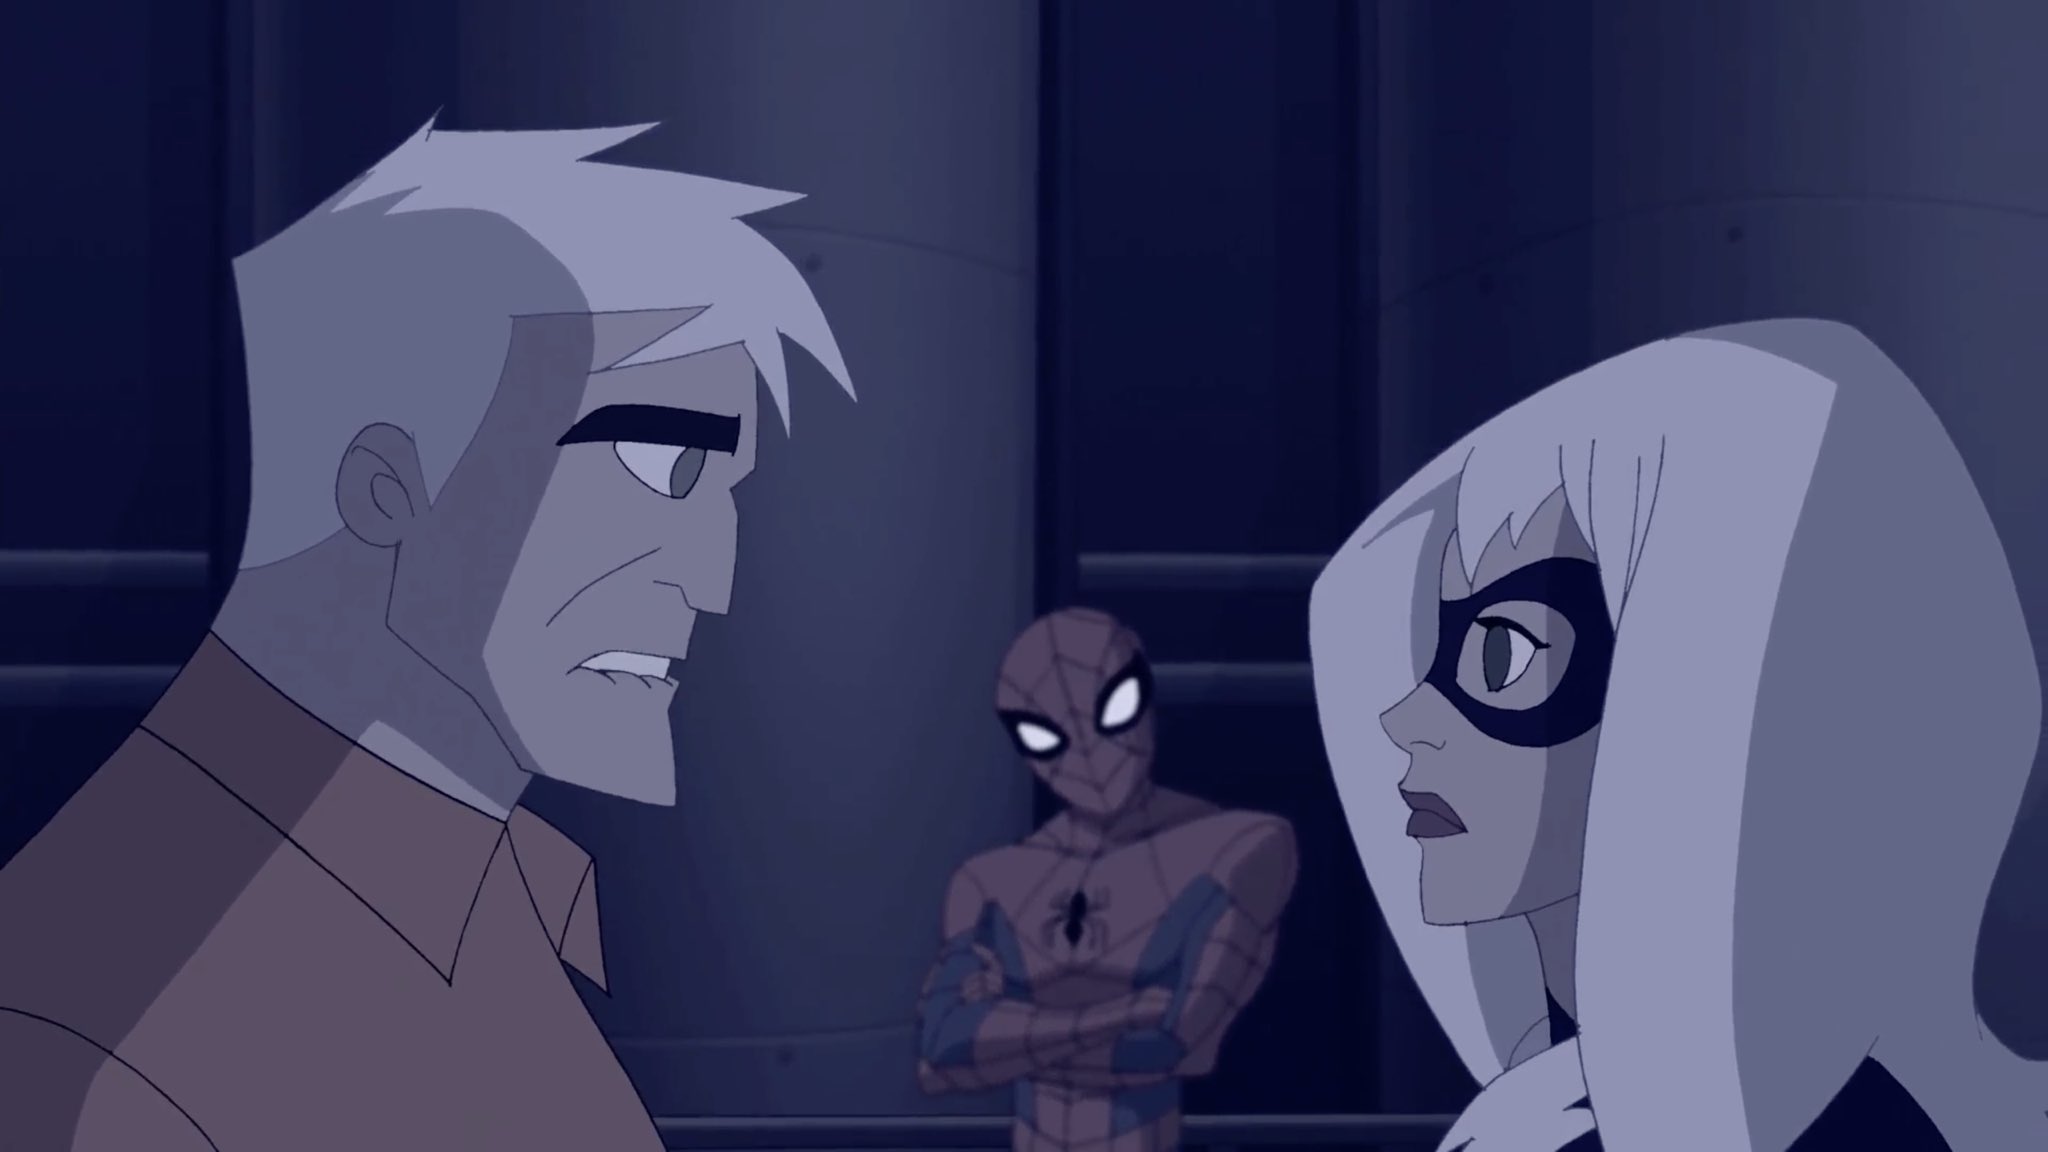 Daily Spectacular Spider-Man! on Twitter: 